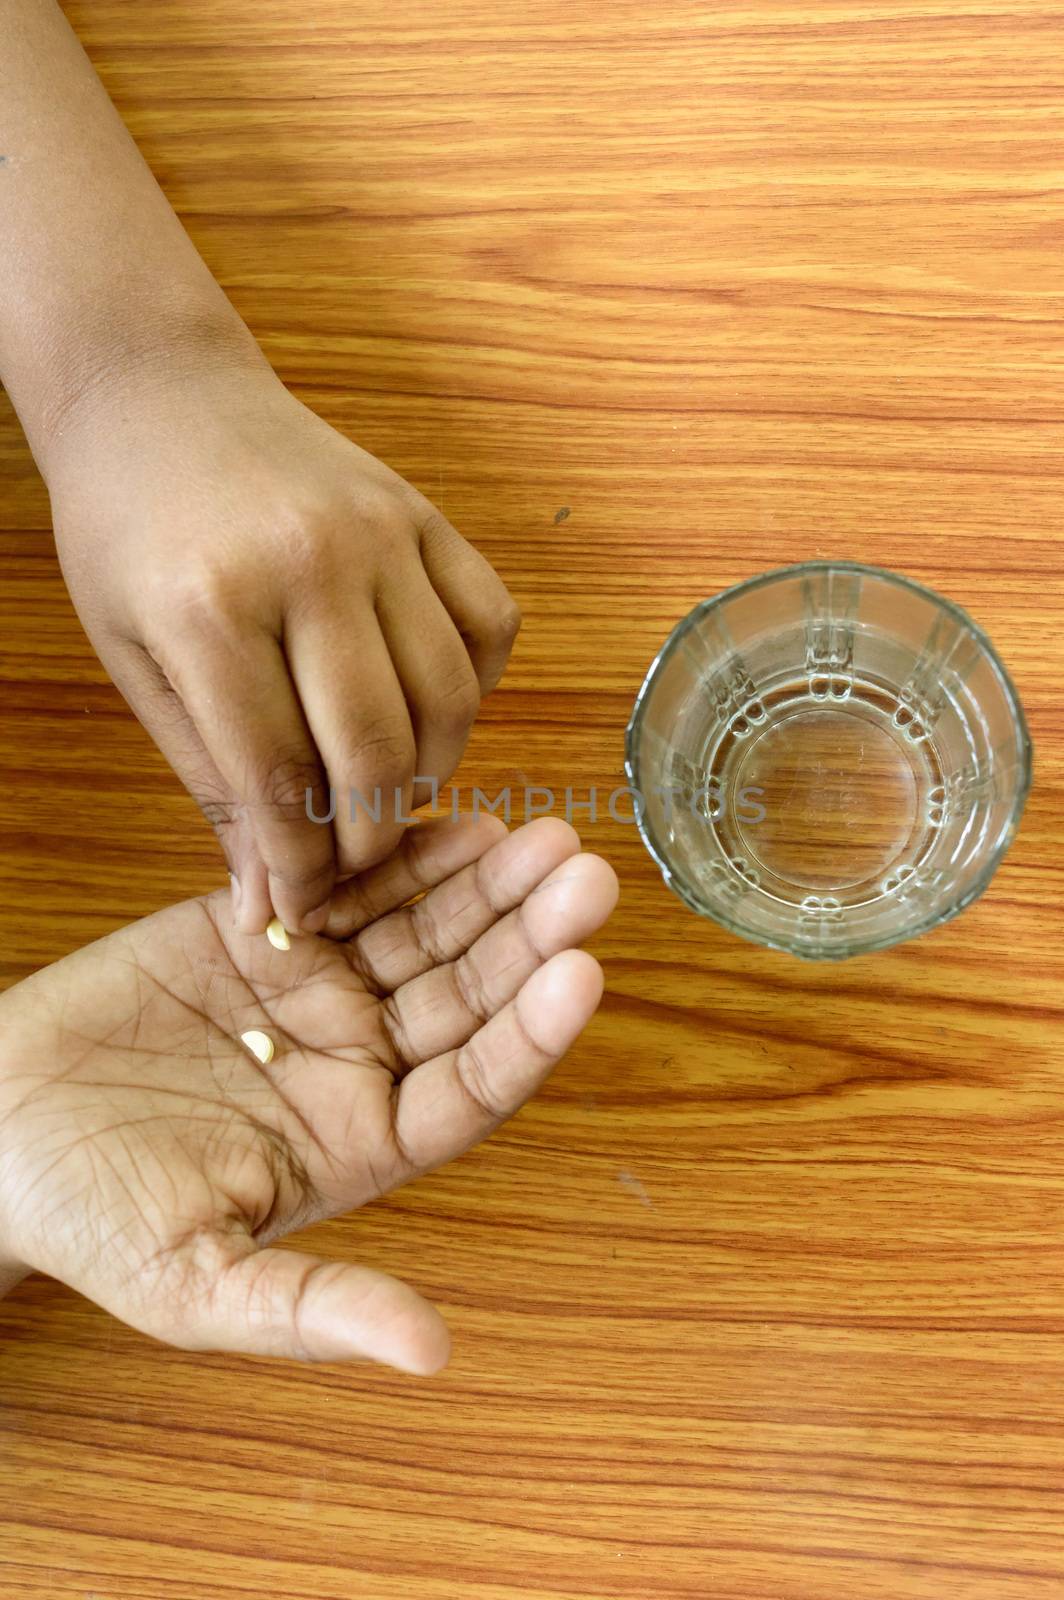 Self-treatment at home as per prescribed by doctor. A teenager boy pouring medicine into her hand. Medical, health care or people concept. High Angel view. Close up with copy space room for text. by sudiptabhowmick